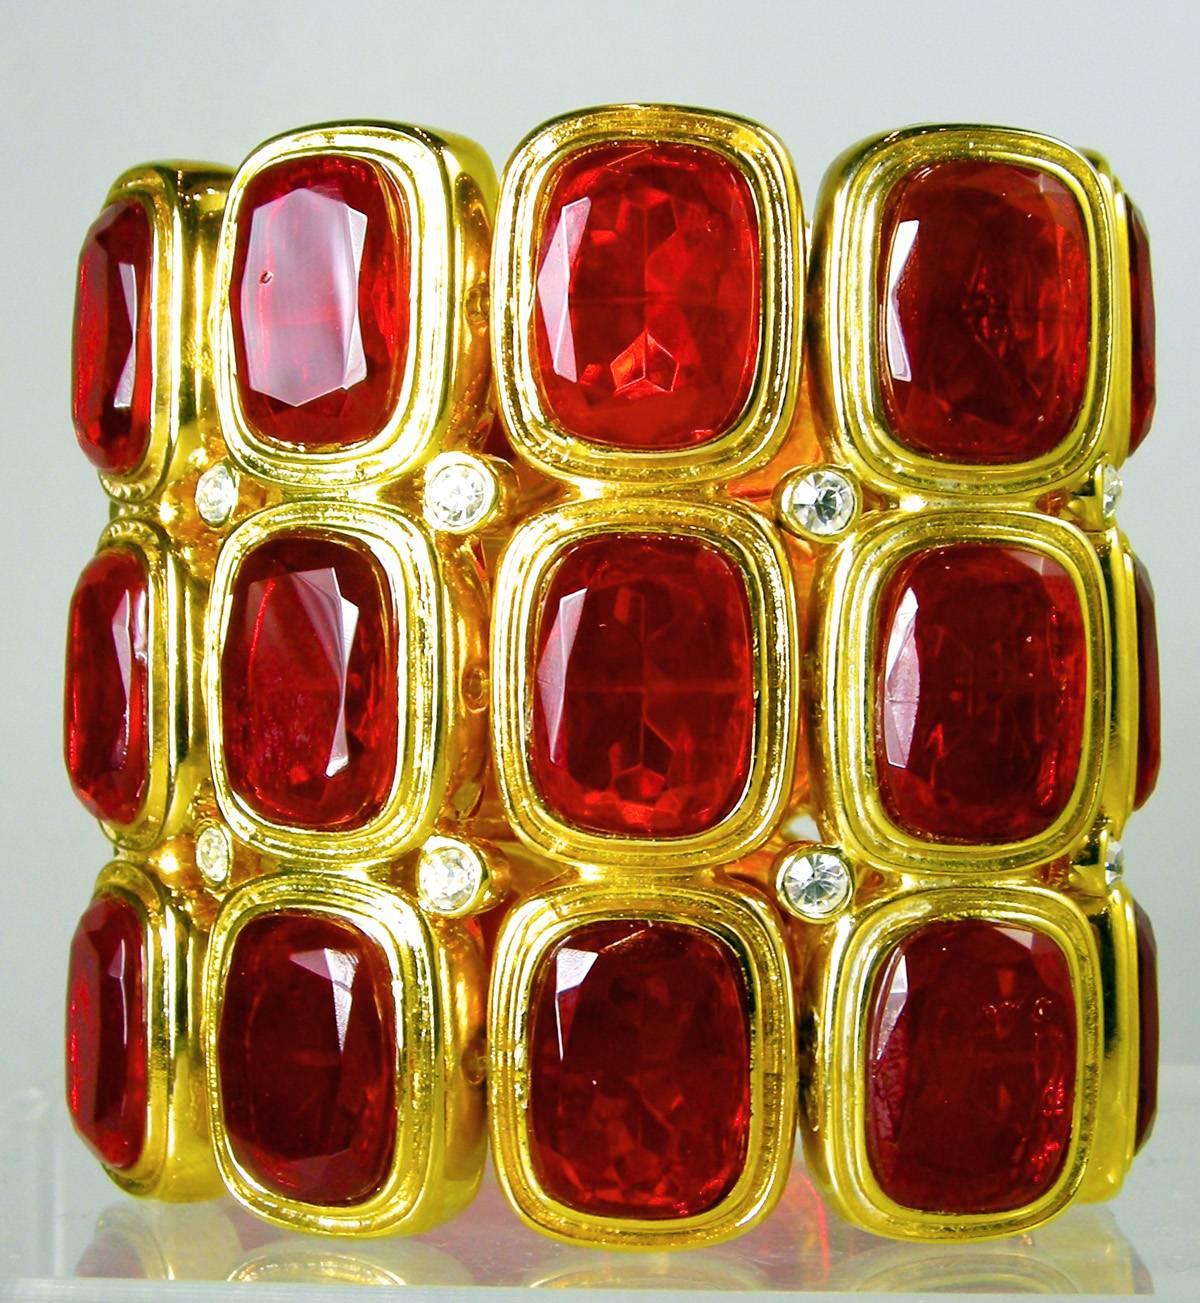 This bracelet has been in great demand and we are lucky to find another one. This Kenneth Jay Lane bracelet features large red rhinestones that are bezel into a gold tone setting. Clear rhinestones accentuate the bracelet throughout. This stretch